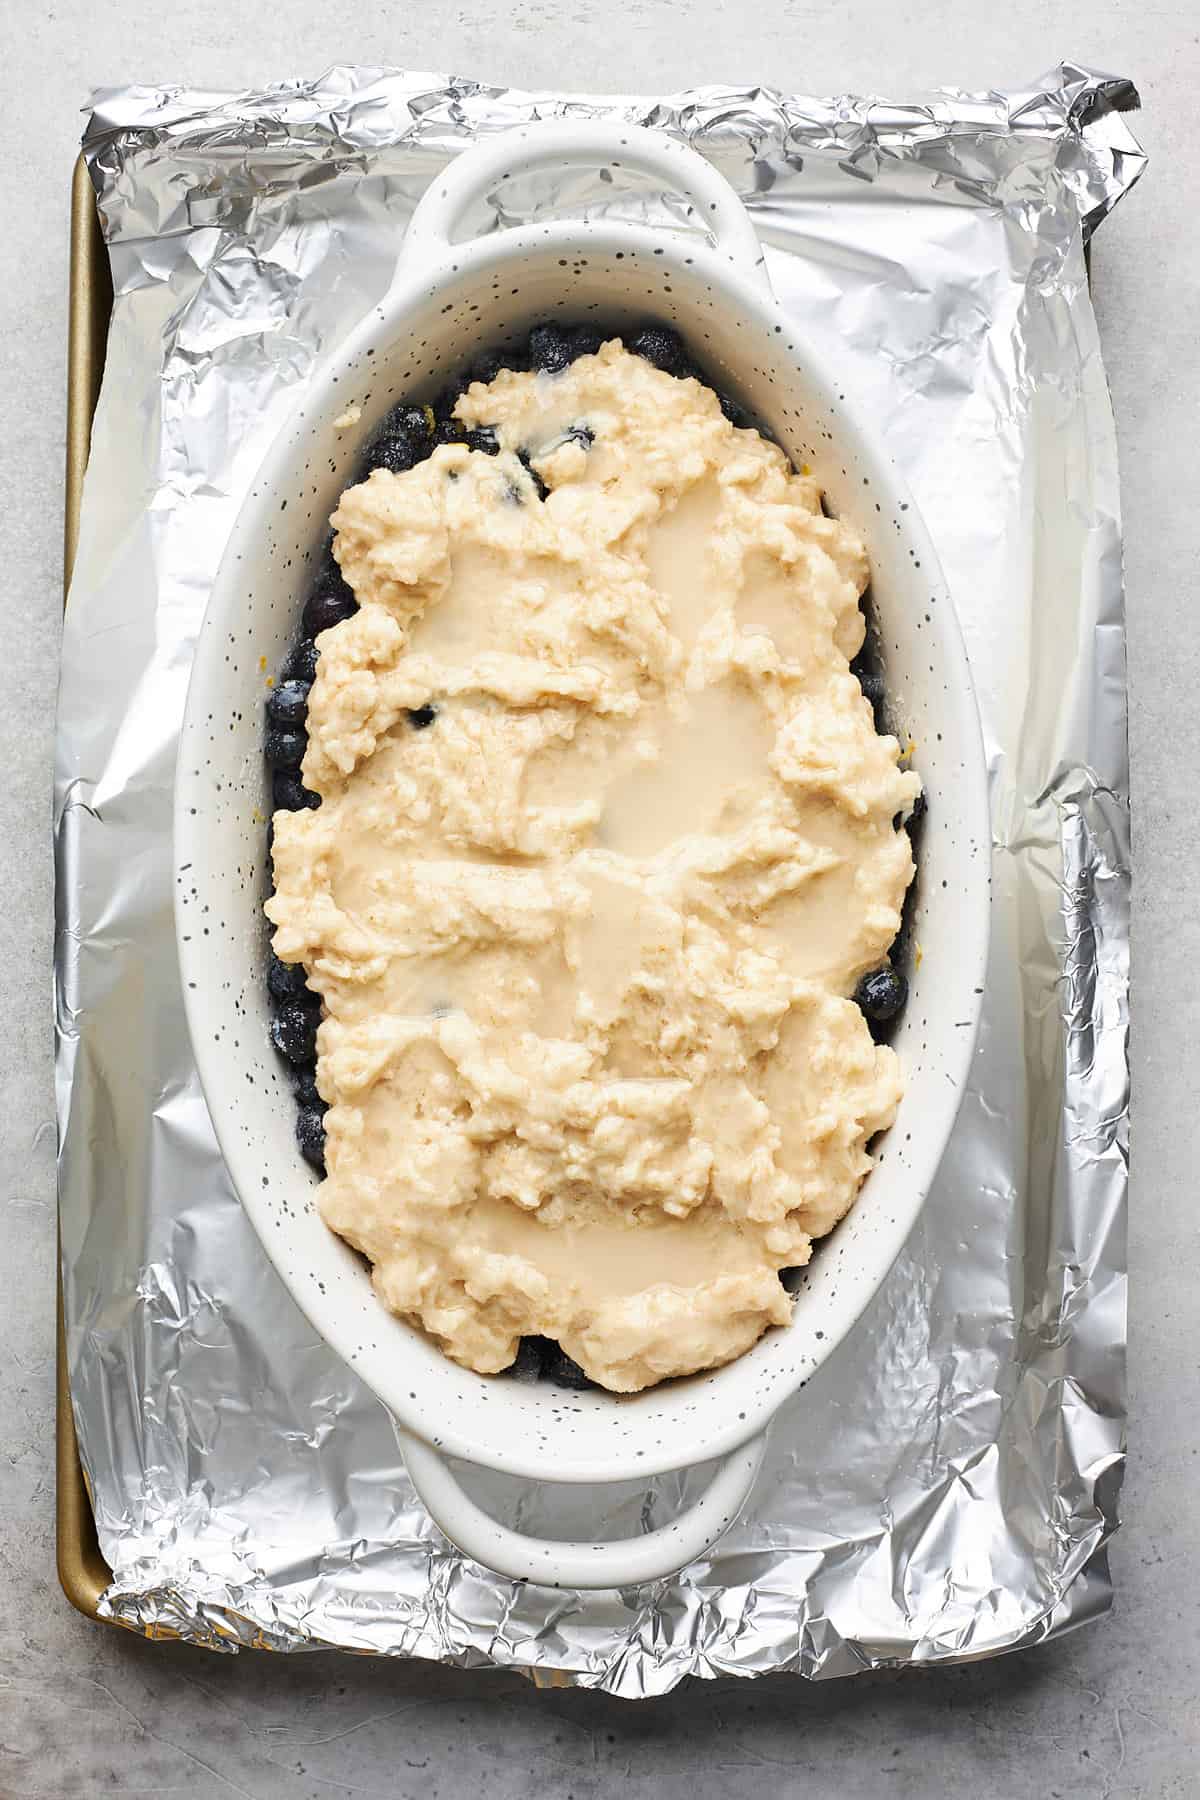 Biscuit dough spread over blueberries in an oval baking dish.